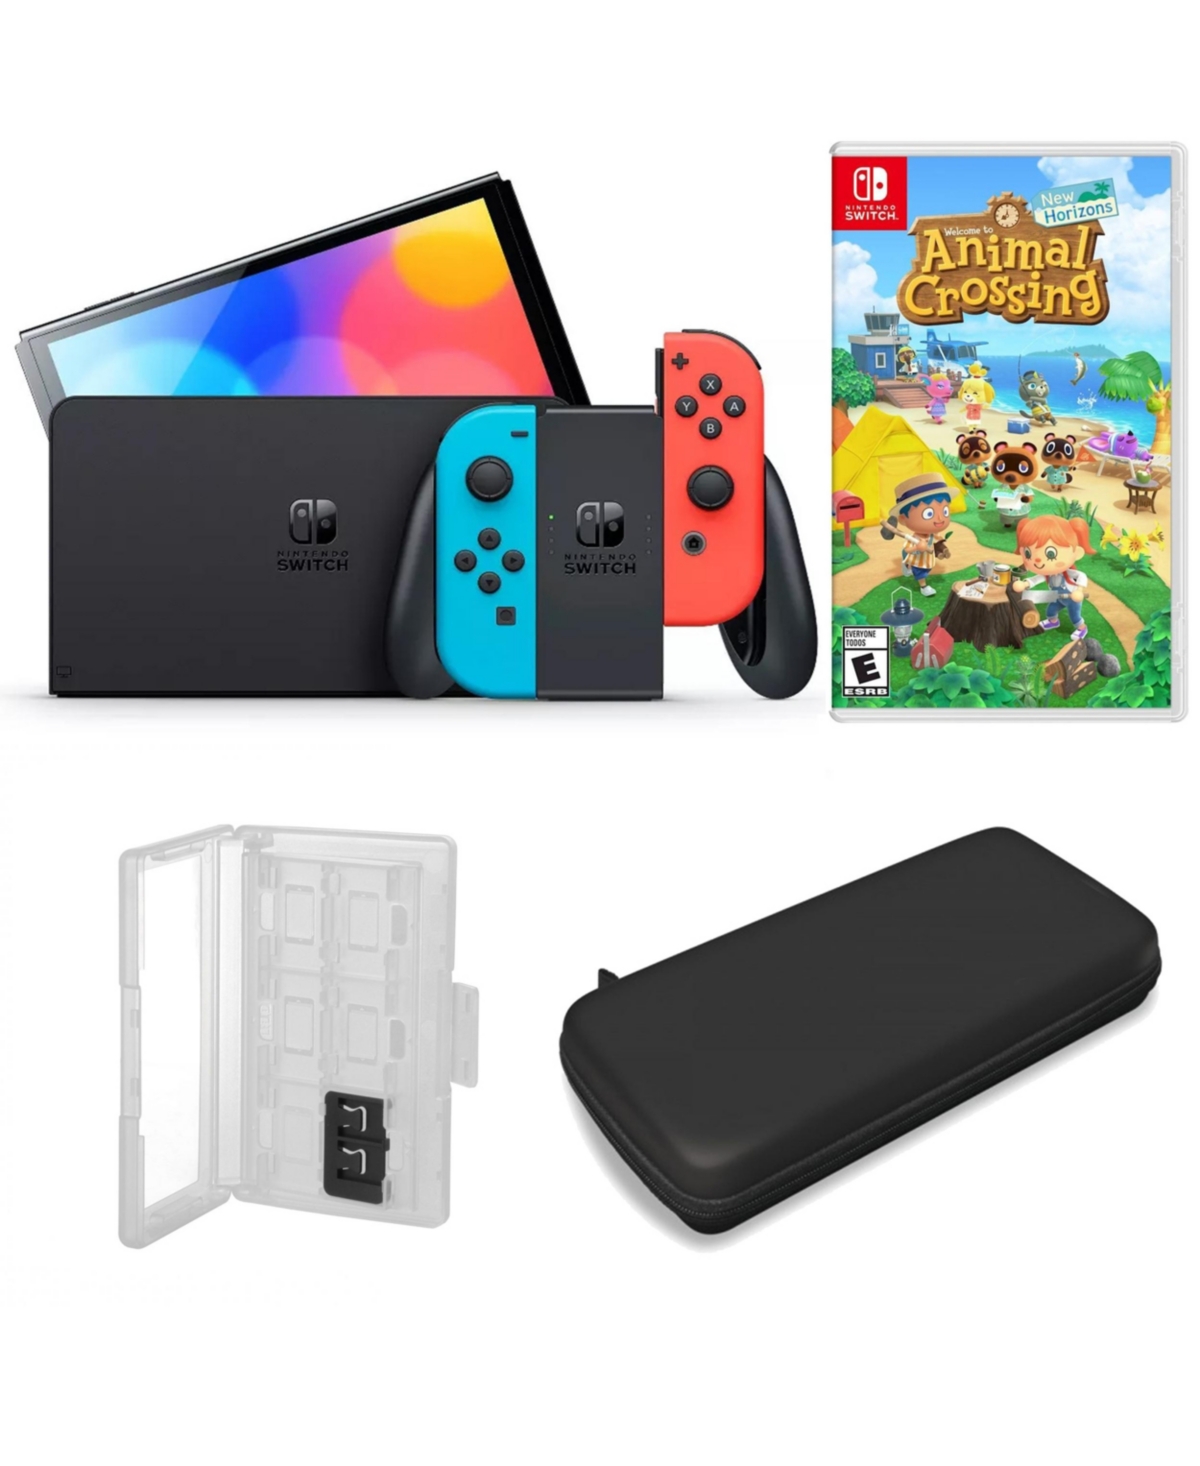 UPC 658580285968 product image for Nintendo Switch Oled in Neon with Animal Crossing & Accessories | upcitemdb.com